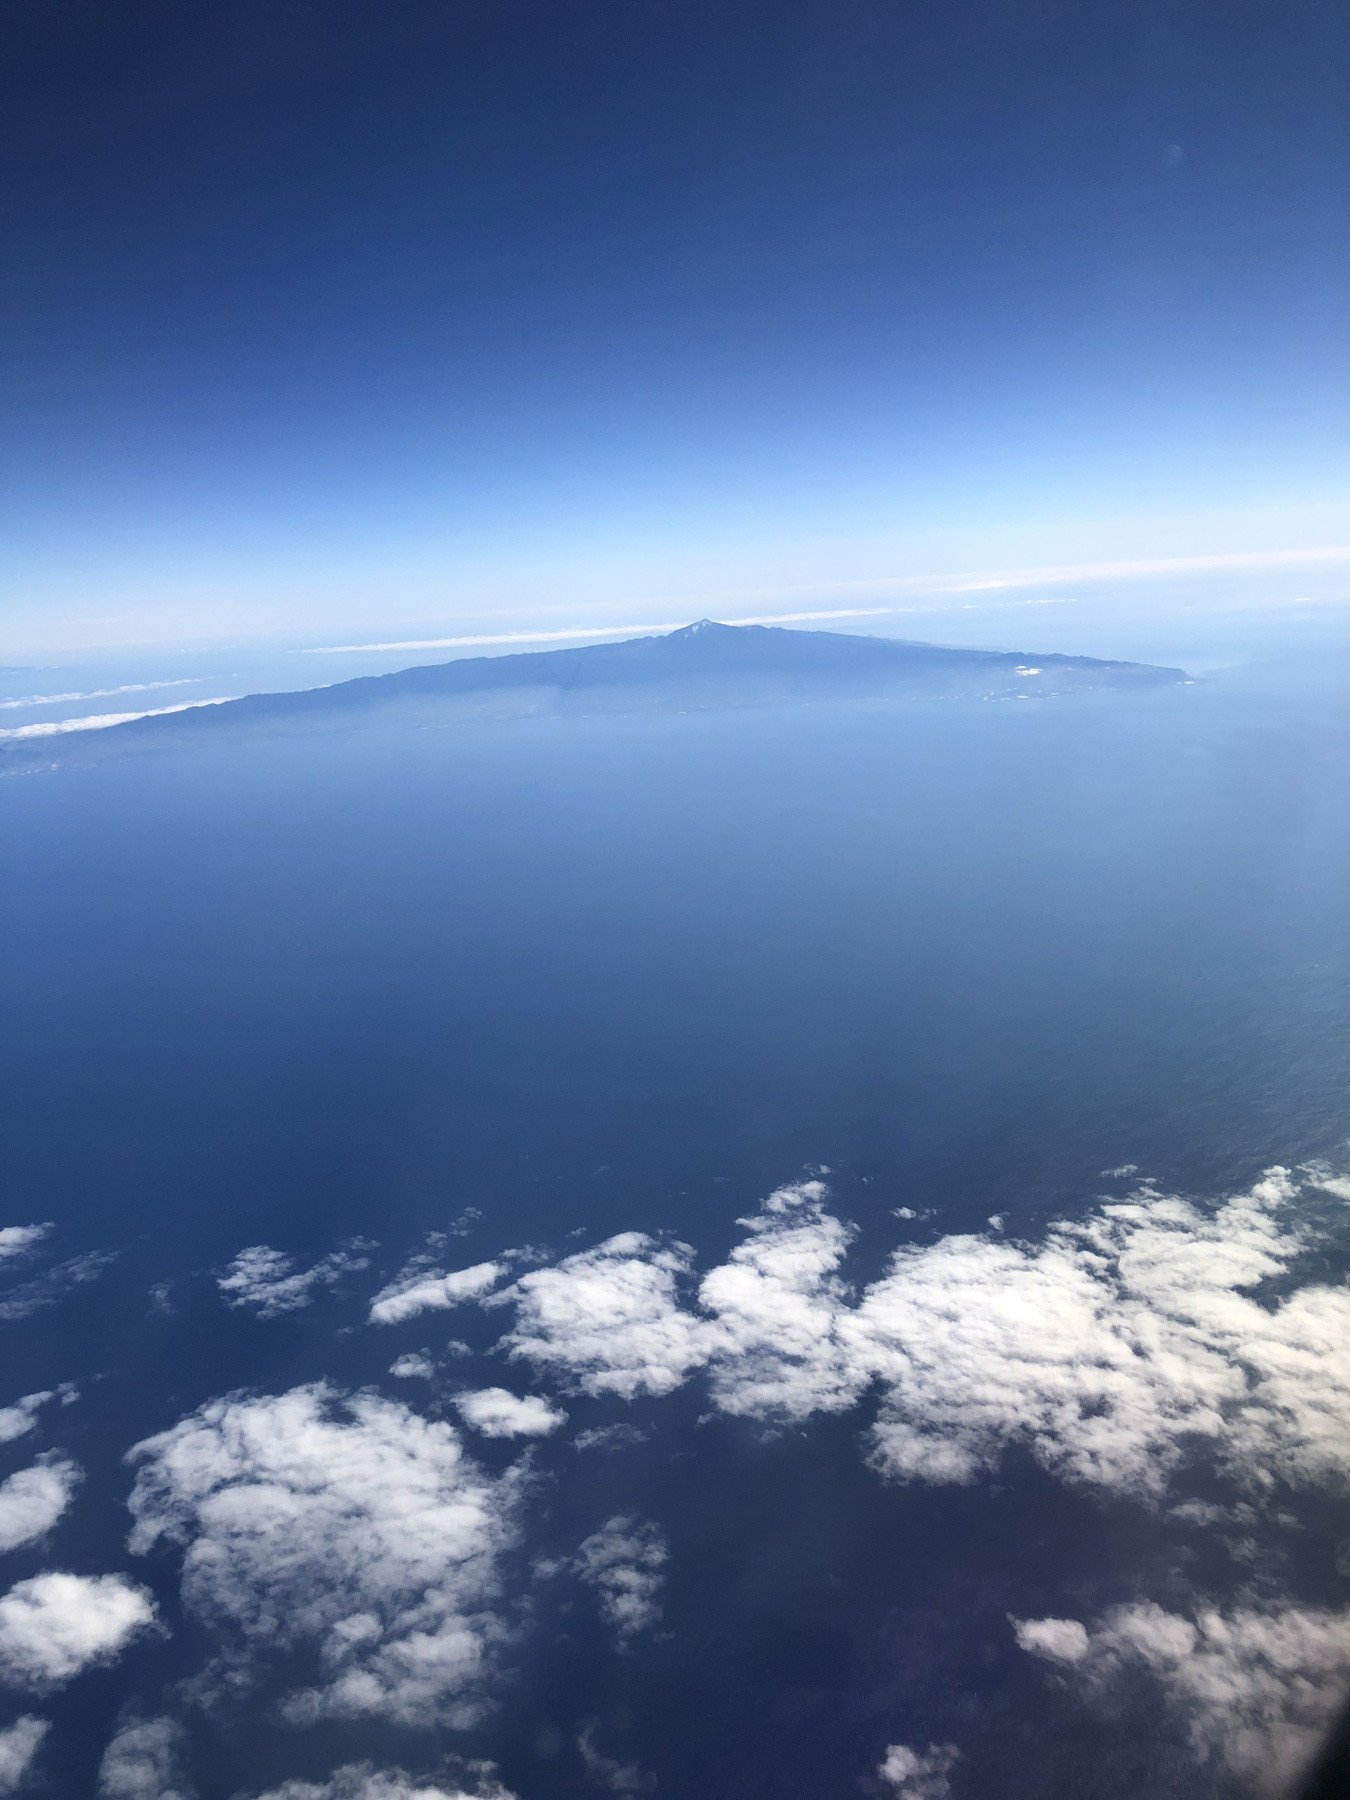 Tenerife from the air